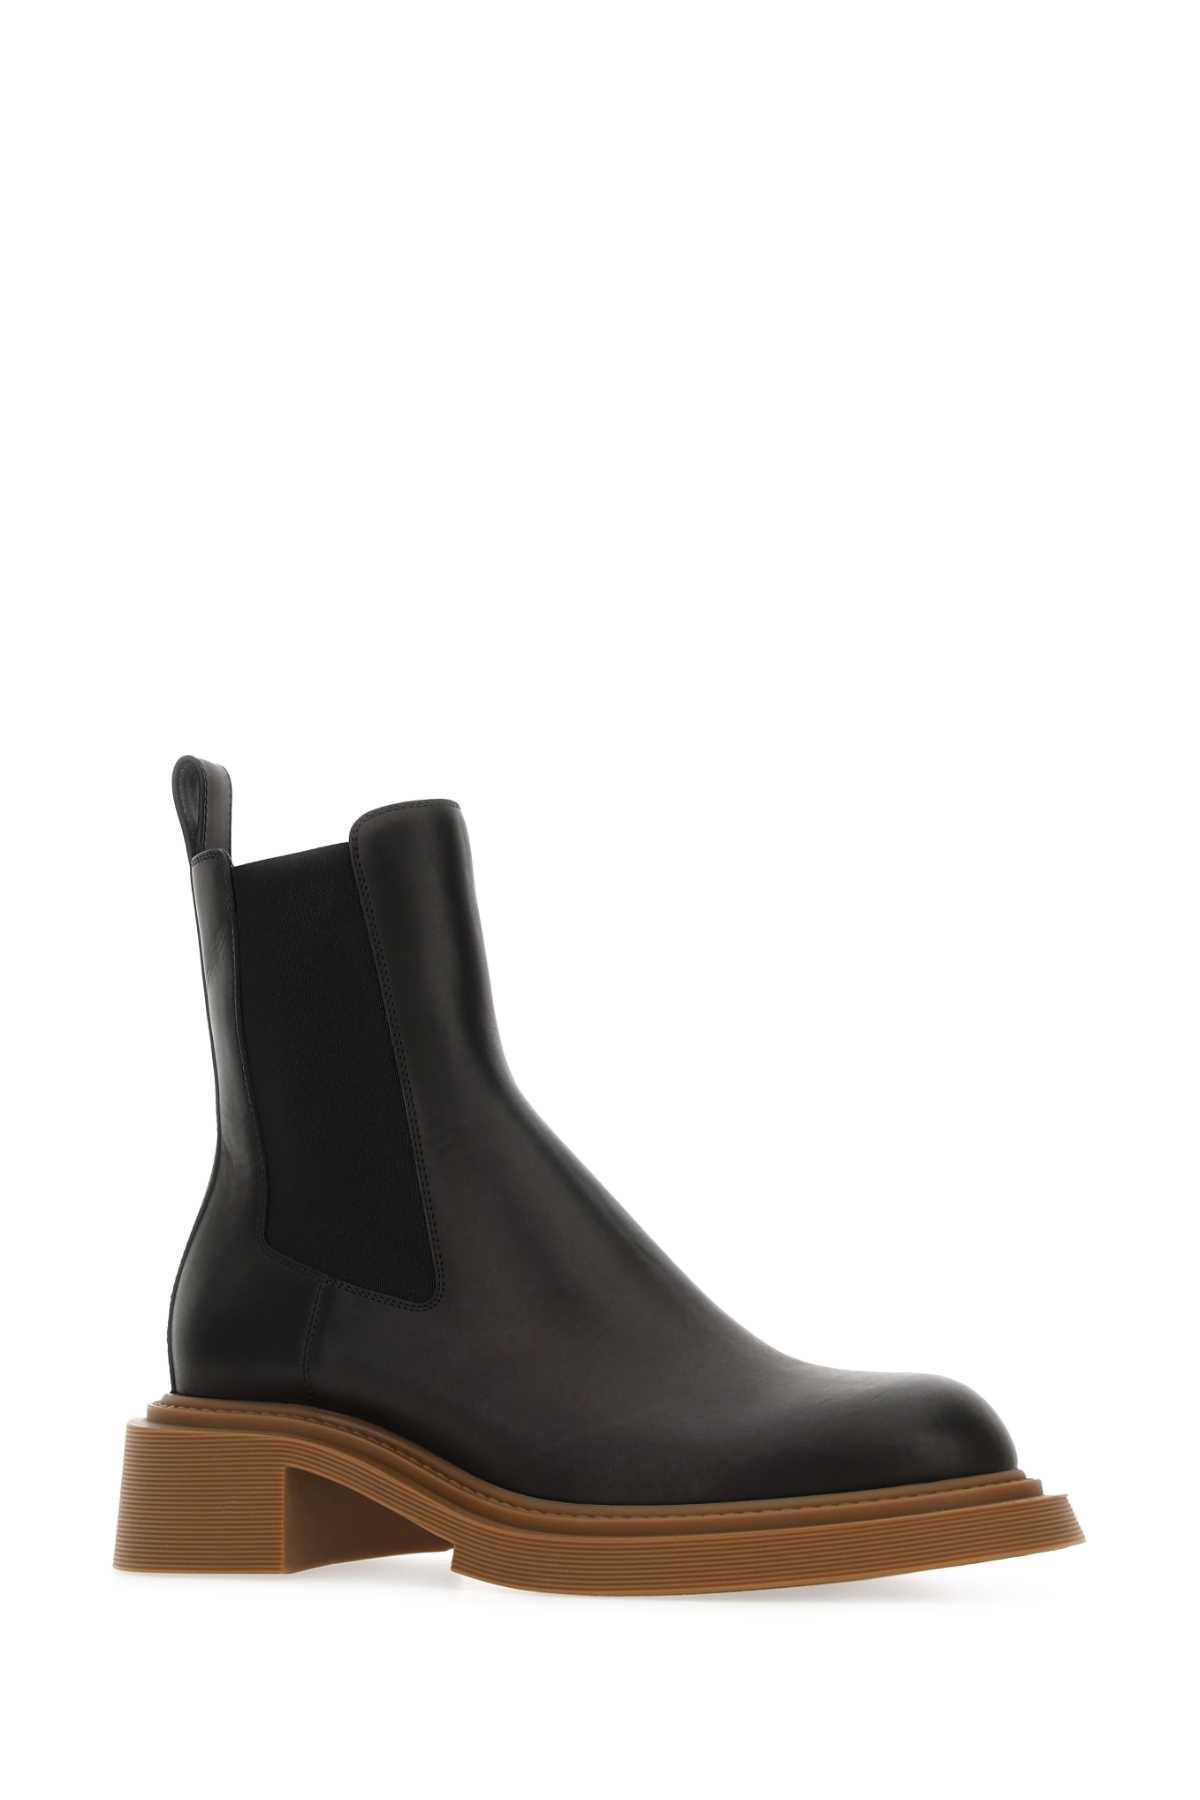 Shop Loewe Black Leather Chelsea Ankle Boots